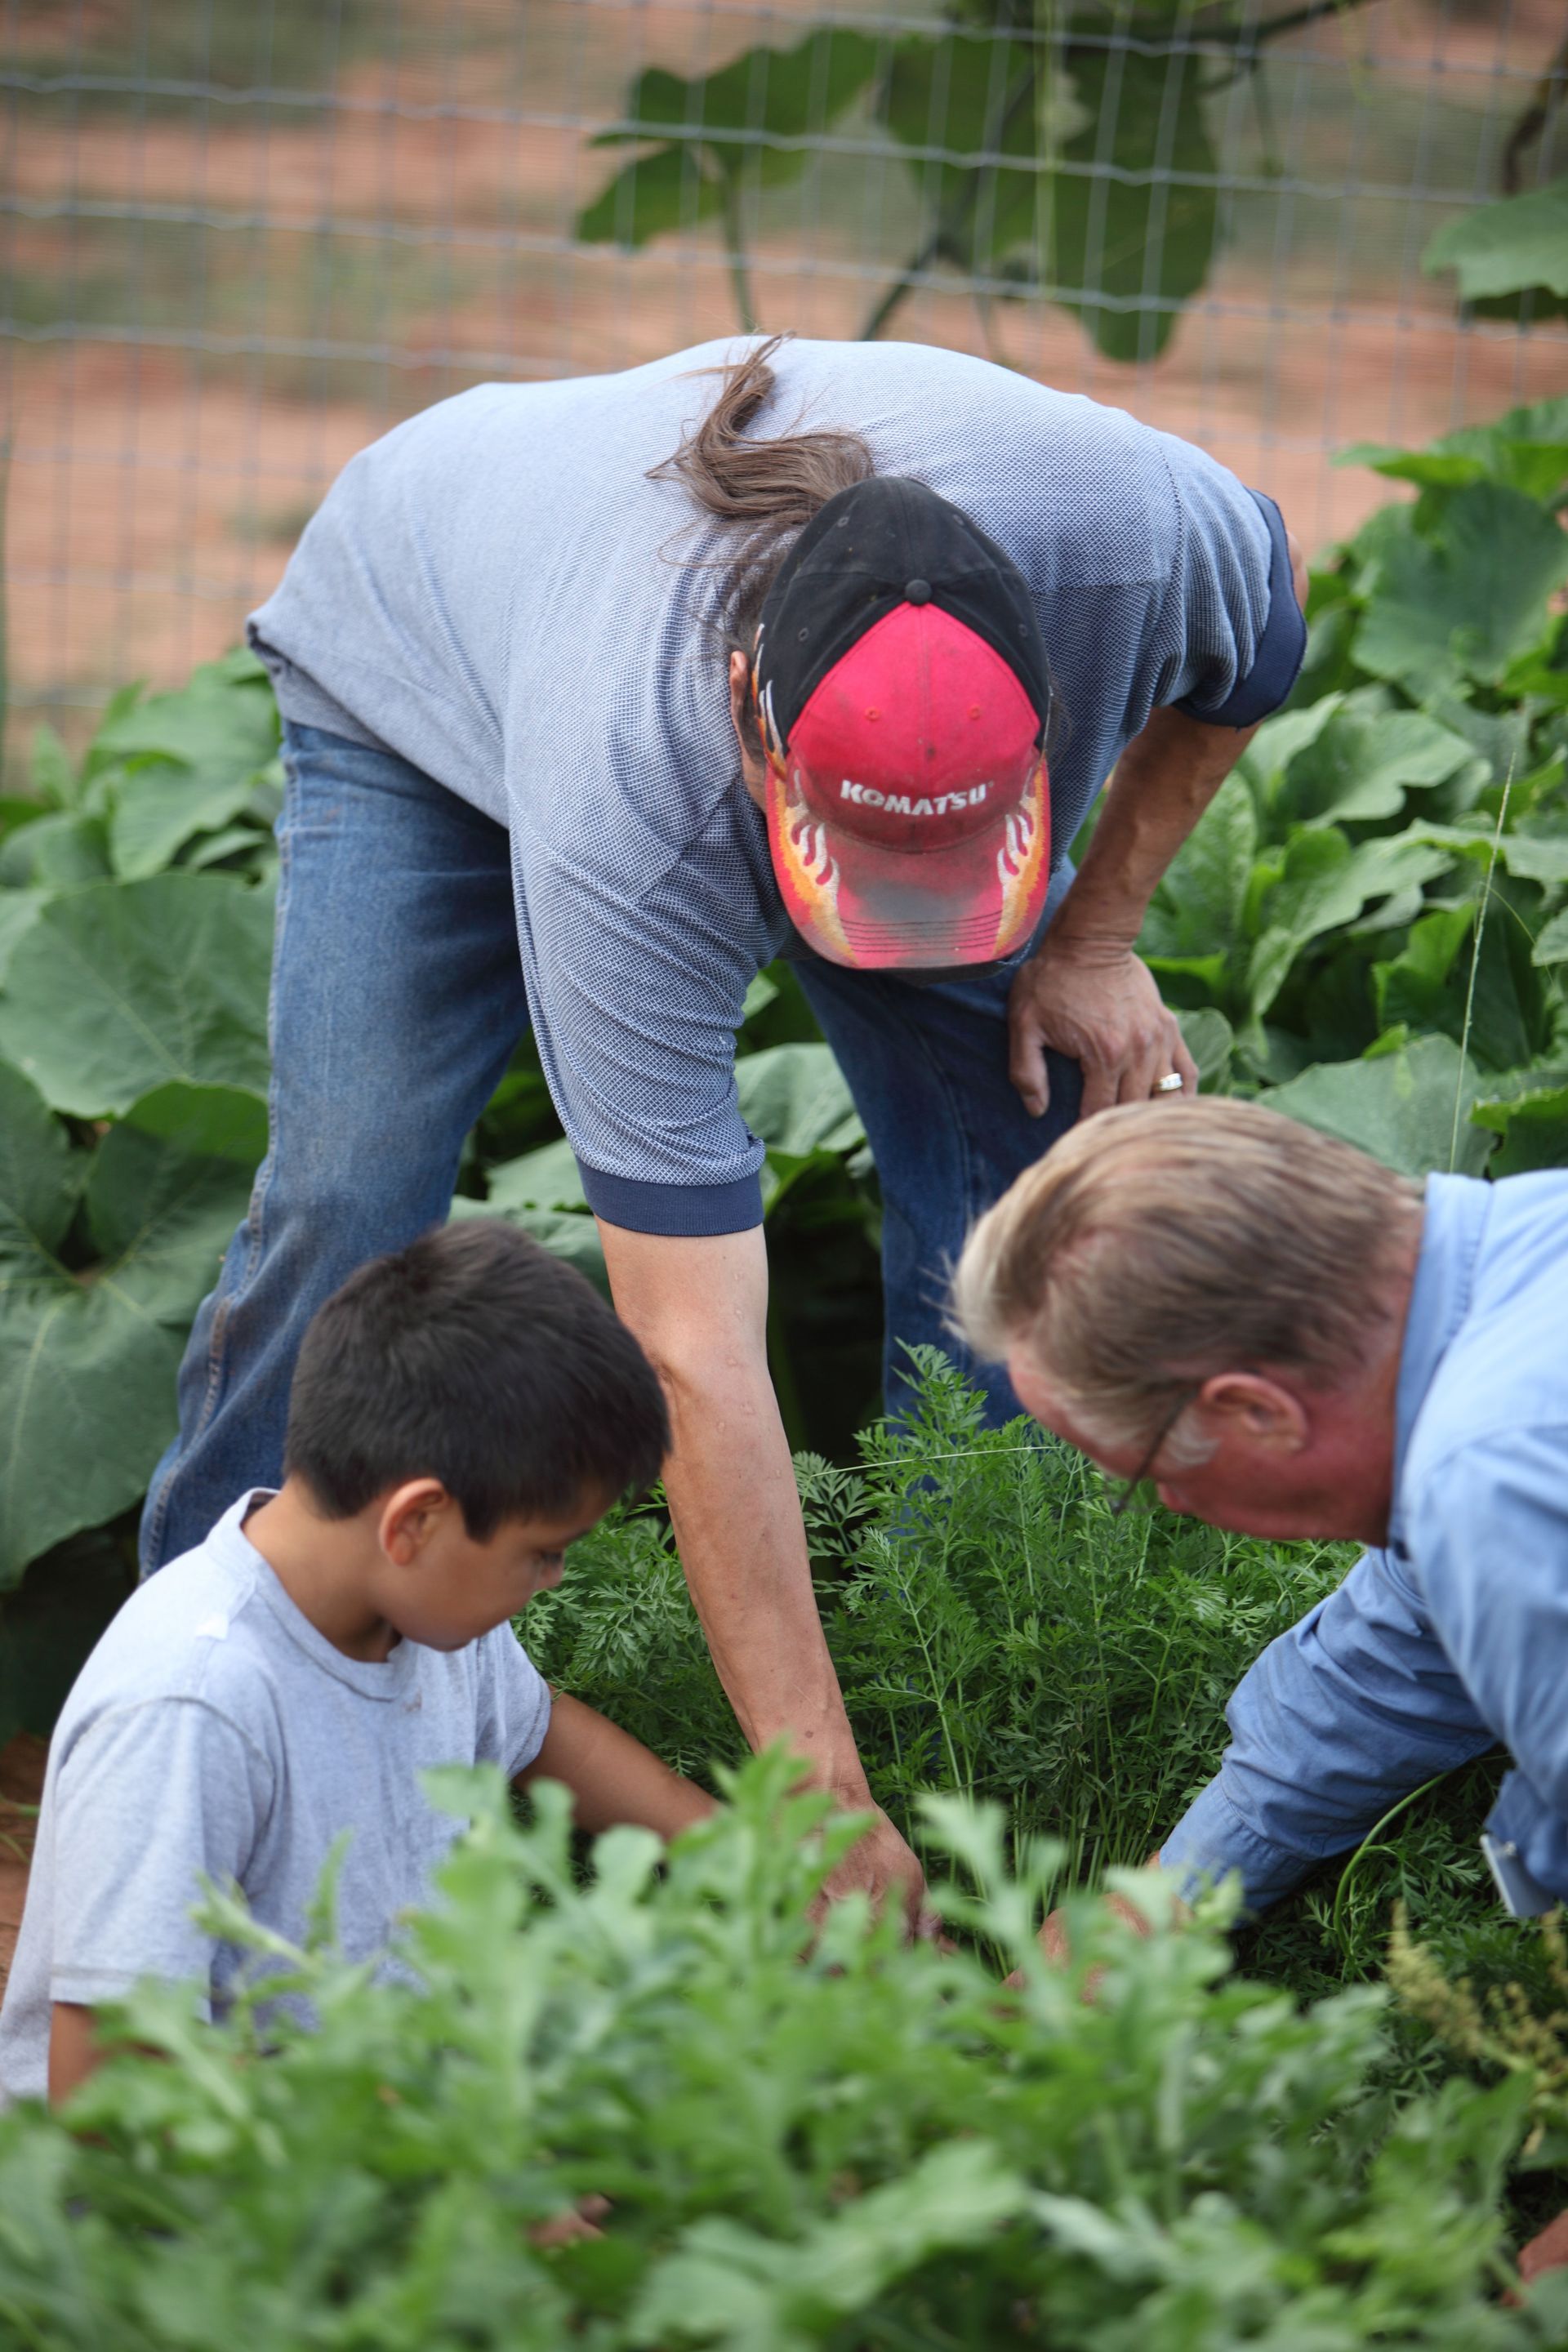 Two men and a young boy working in a garden on an Indian reservation.